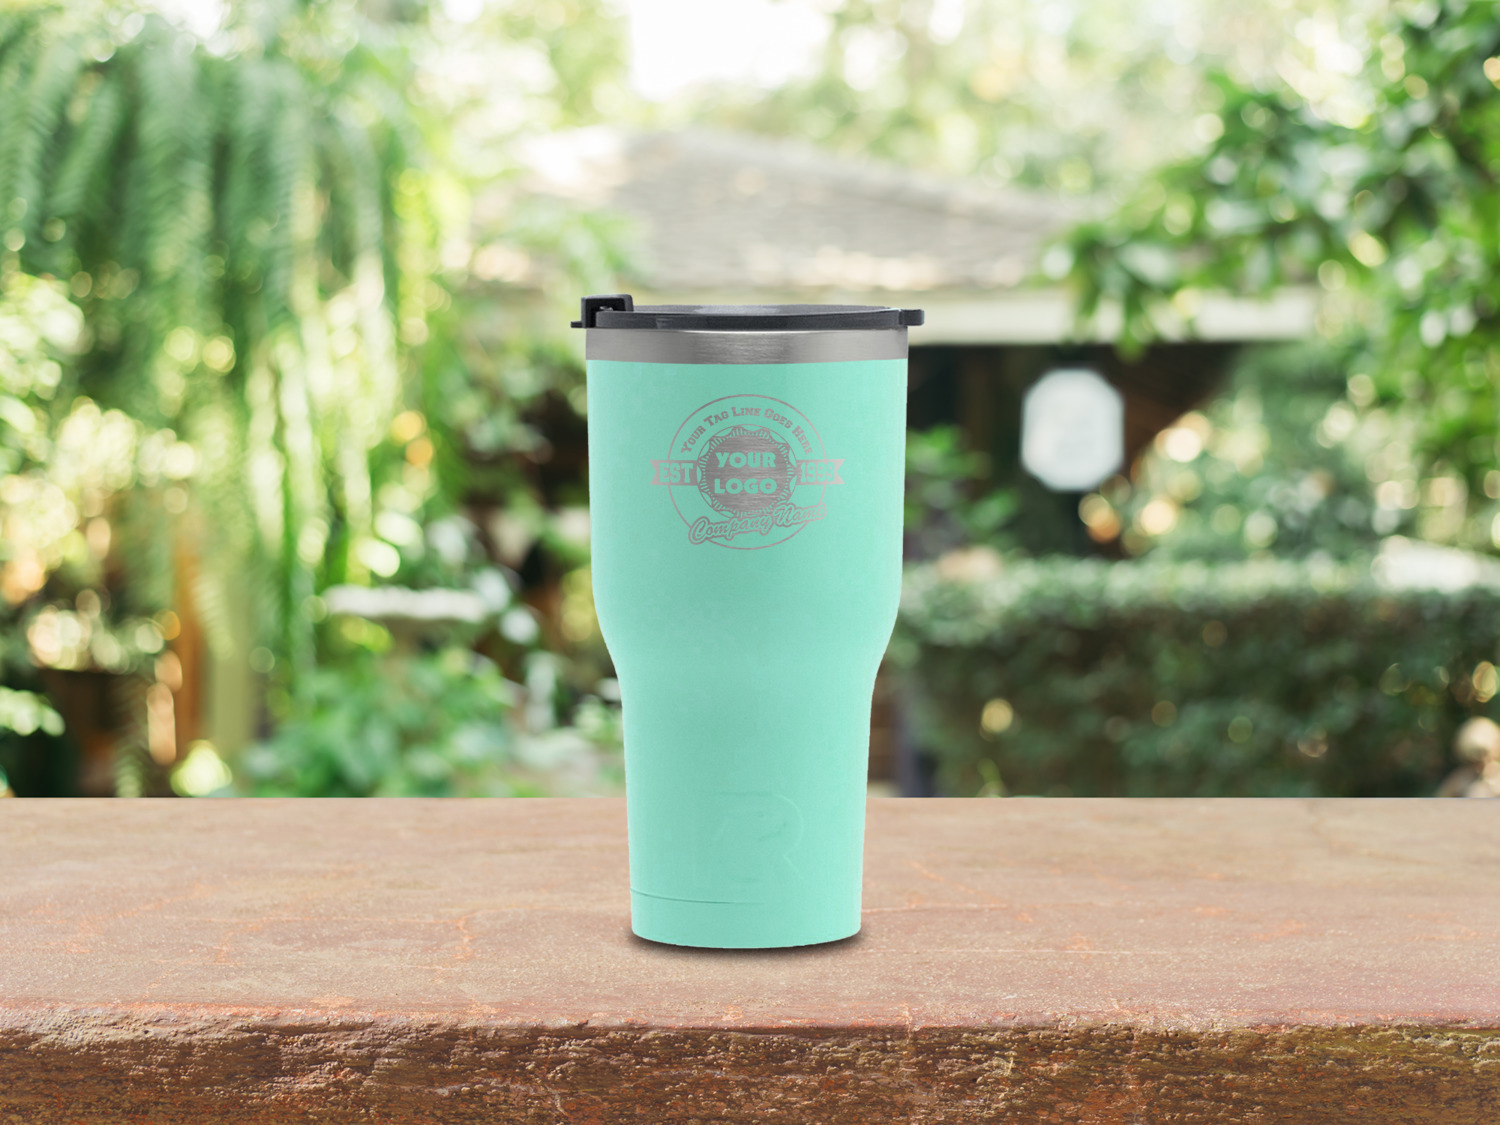 https://www.youcustomizeit.com/common/MAKE/1634642/Logo-Tag-Line-Teal-RTIC-Tumbler-Lifestyle-Front.jpg?lm=1688678462